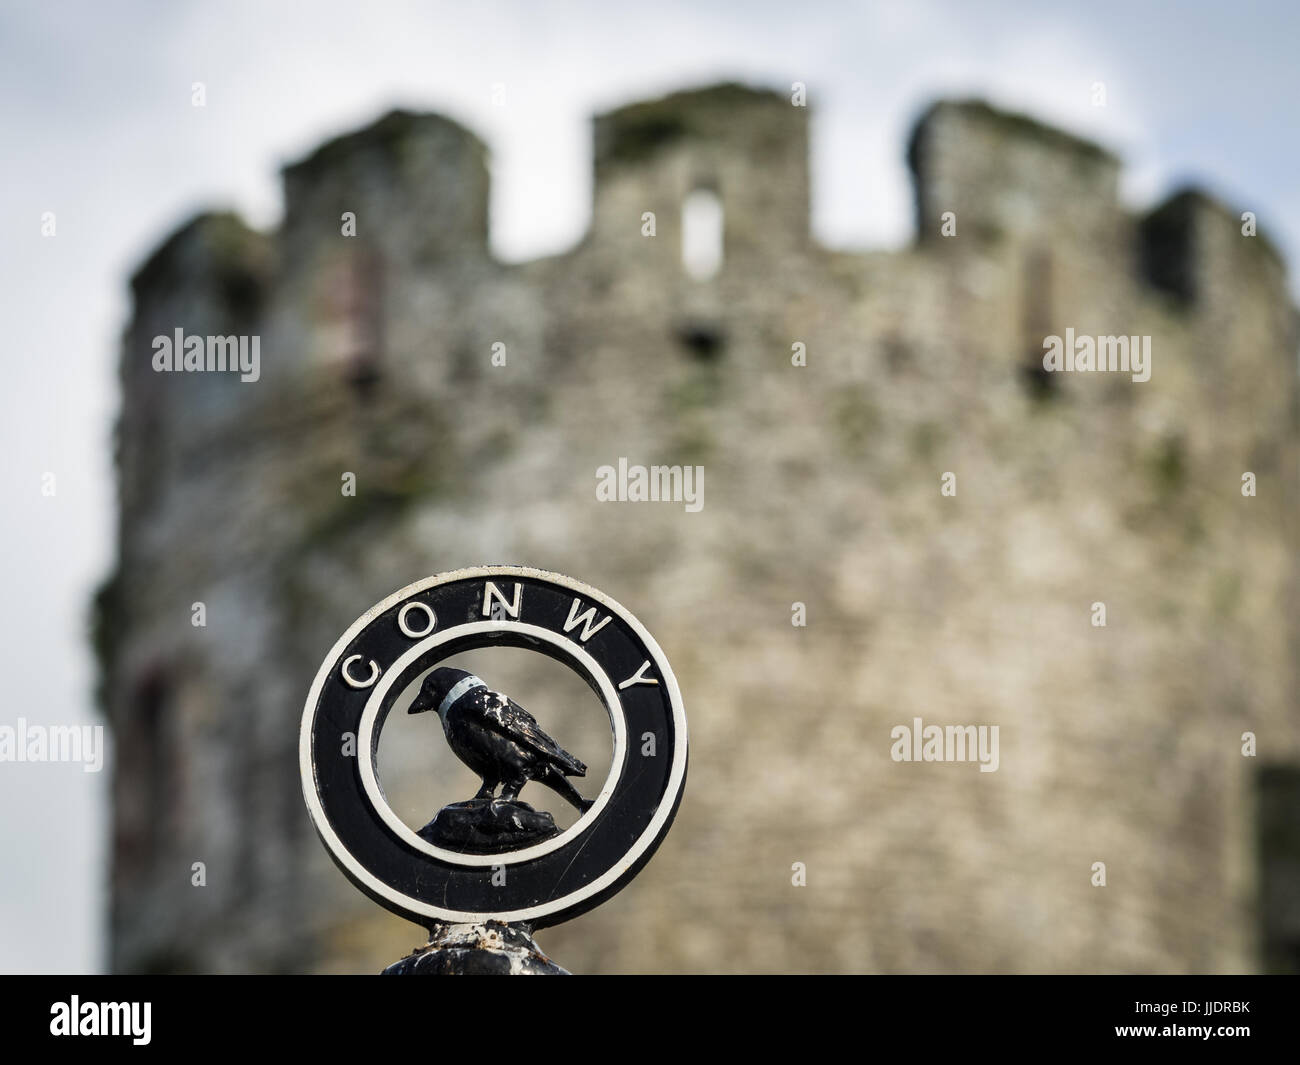 Conwy Castle - the town Jackdaw motif against Conwy Castle in North Wales UK Stock Photo